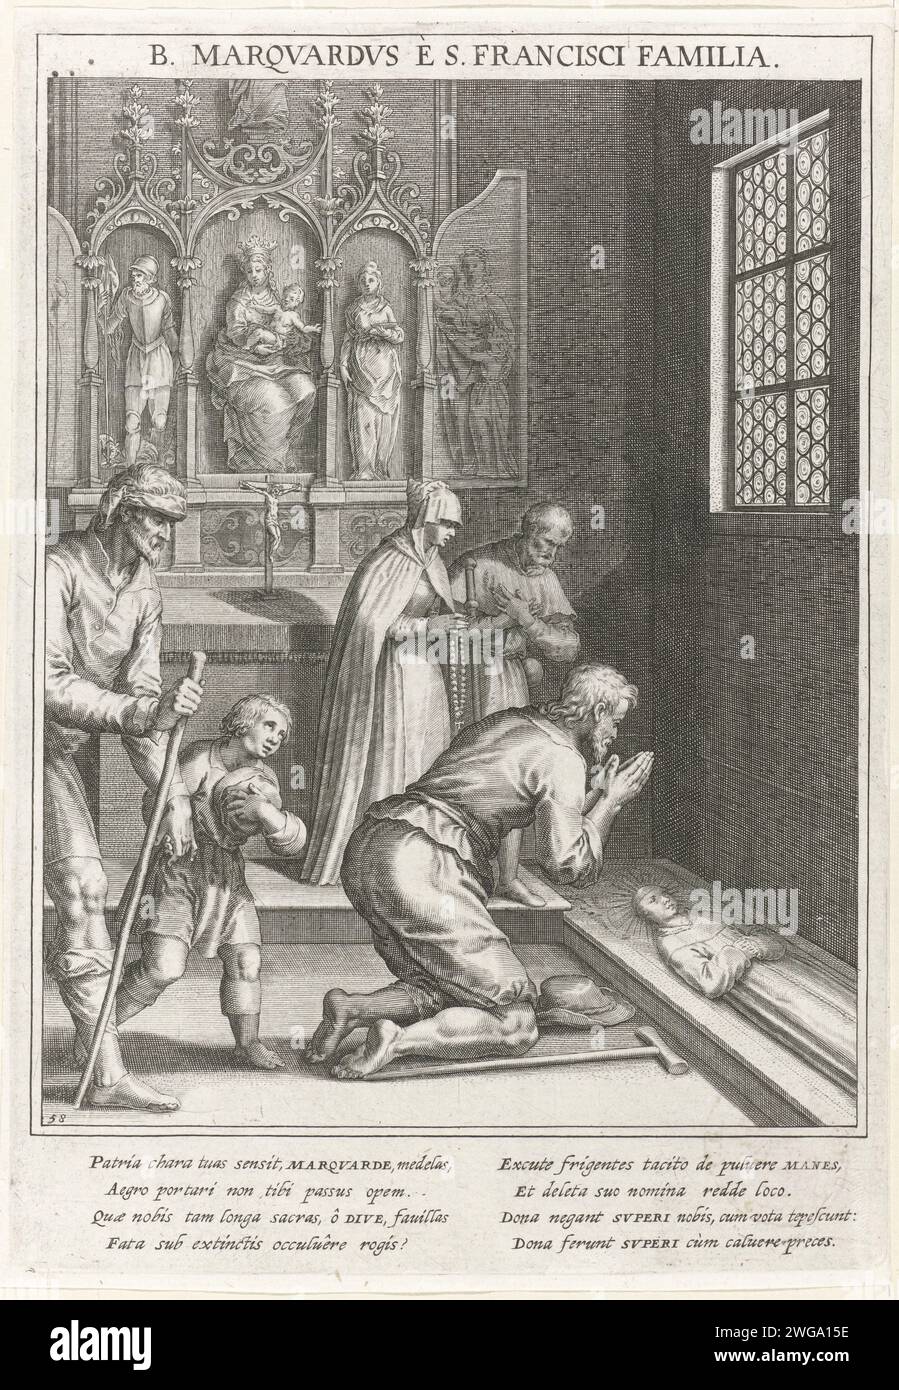 Worship of the grave of the blissful Markard Weissmaler, Raphaël Sadeler (I), after Johann Mathias Kager, 1615 print Interior of a church. Needle kneeling and praying for the grave of the blissful Marward Weissmaler, a lay brother Franciscan. The print has a Latin caption and is the 58th print of a 60-part series on the subject of the saints of Bavaria. München paper engraving / etching saints. miraculous healing. (veneration of) devotional objects. grave, tomb. parts of church interior (crypt). altar with altar-piece (+ Mary). the poor Bavaria Stock Photo